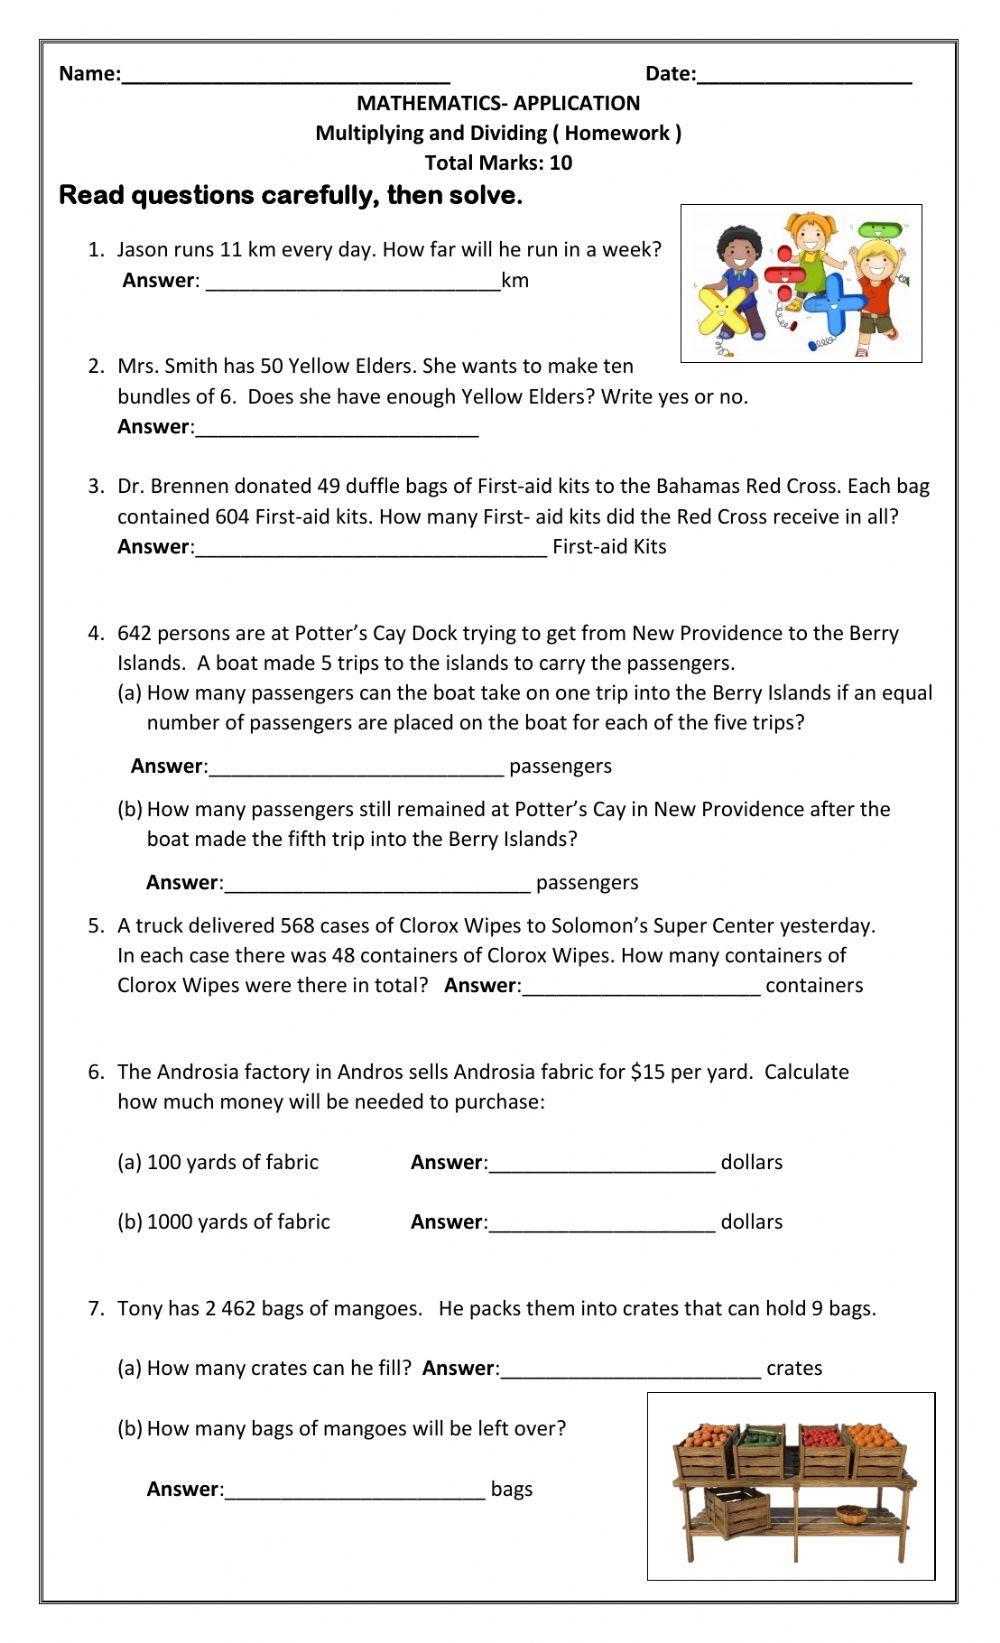 multiplication and division word problems liveworksheets